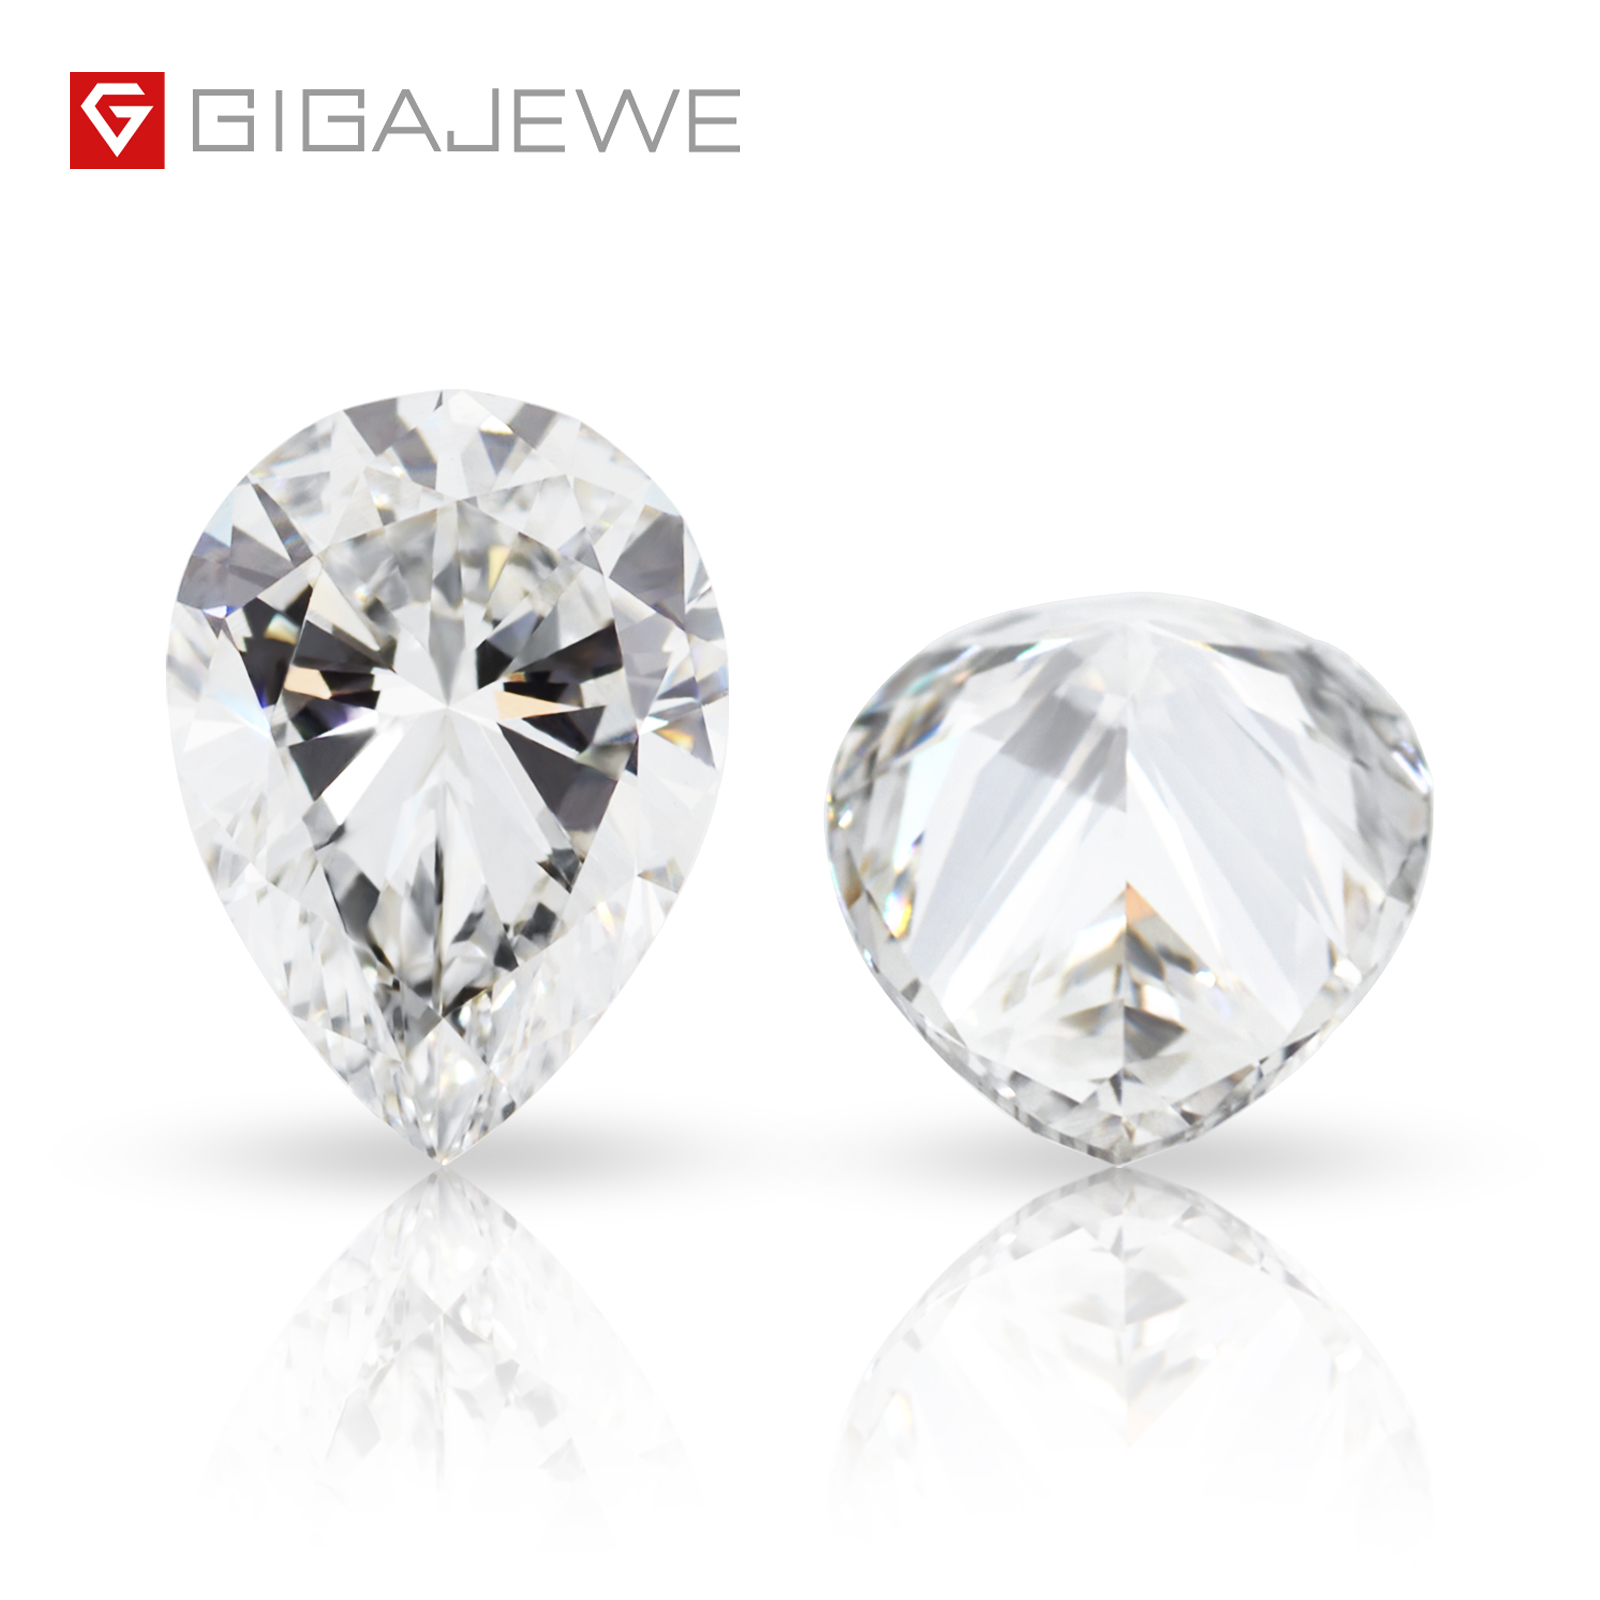 What are the different meanings of the special-shaped moissanite?